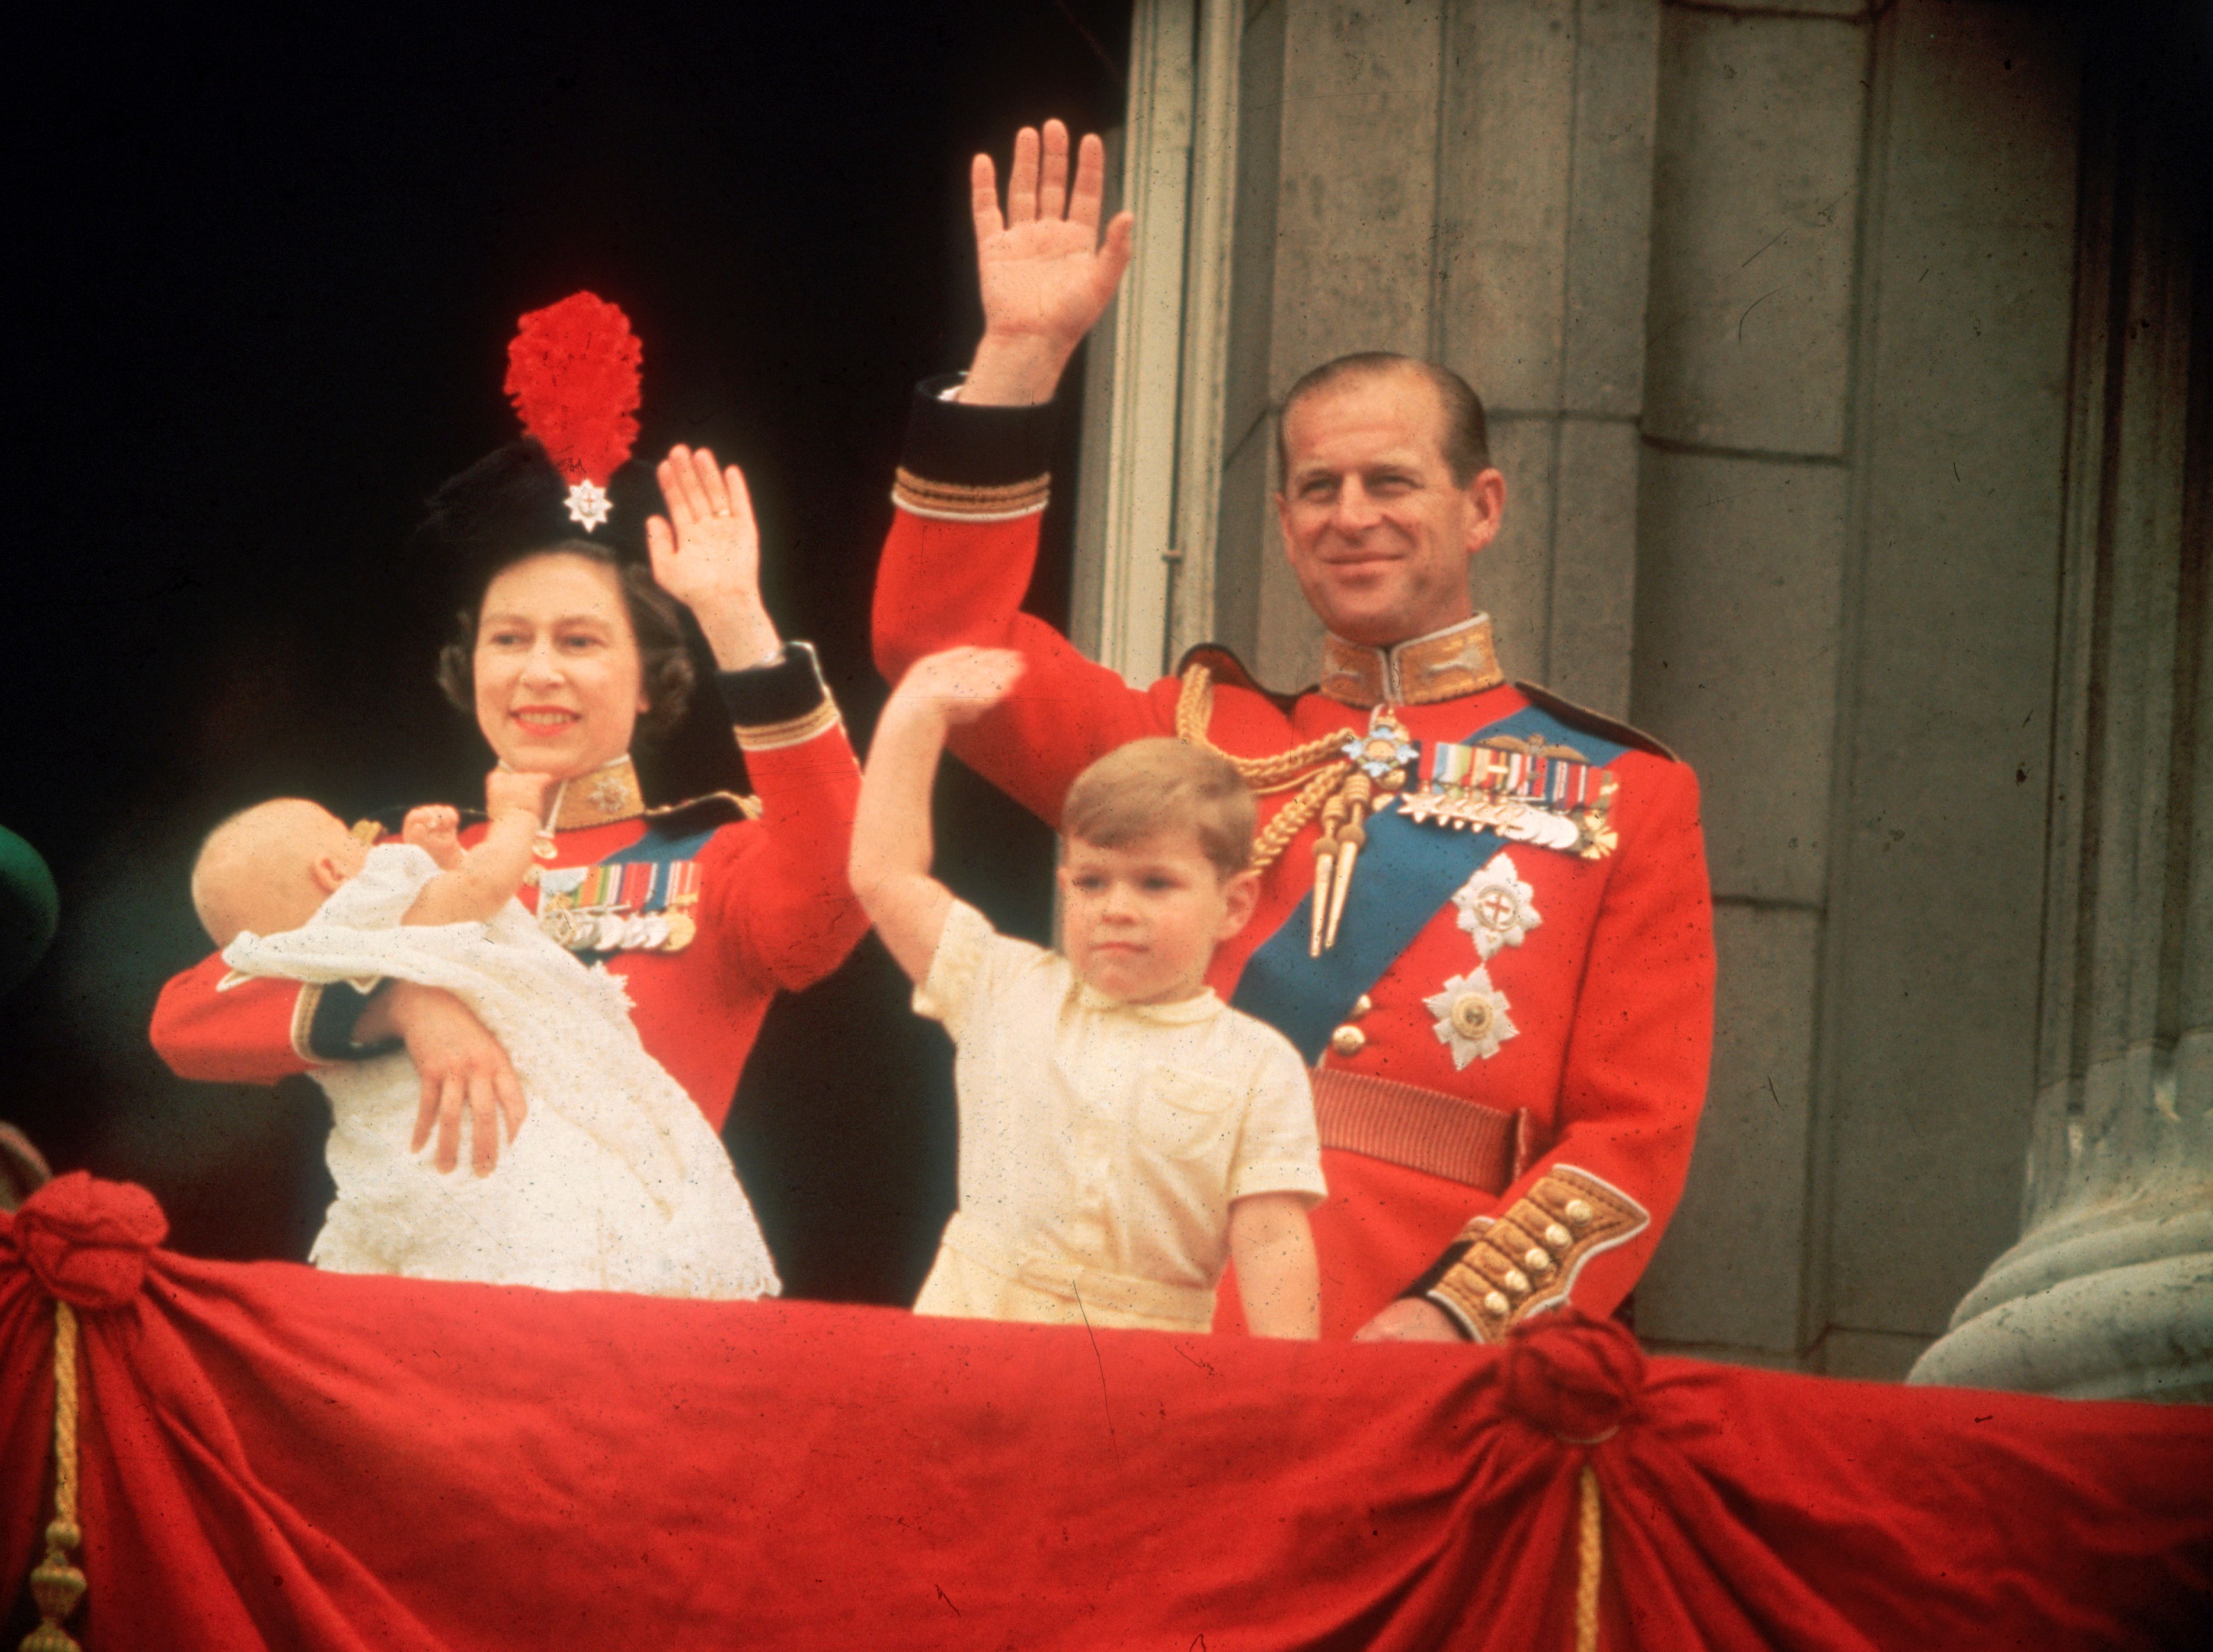 Queen Elizabeth, Prince Philip, Prince Andrew, and Prince Edward on the balcony at Buckingham Palace during the Trooping of the Colour event on June 13, 1964. | Source: Fox Photos/Getty Images